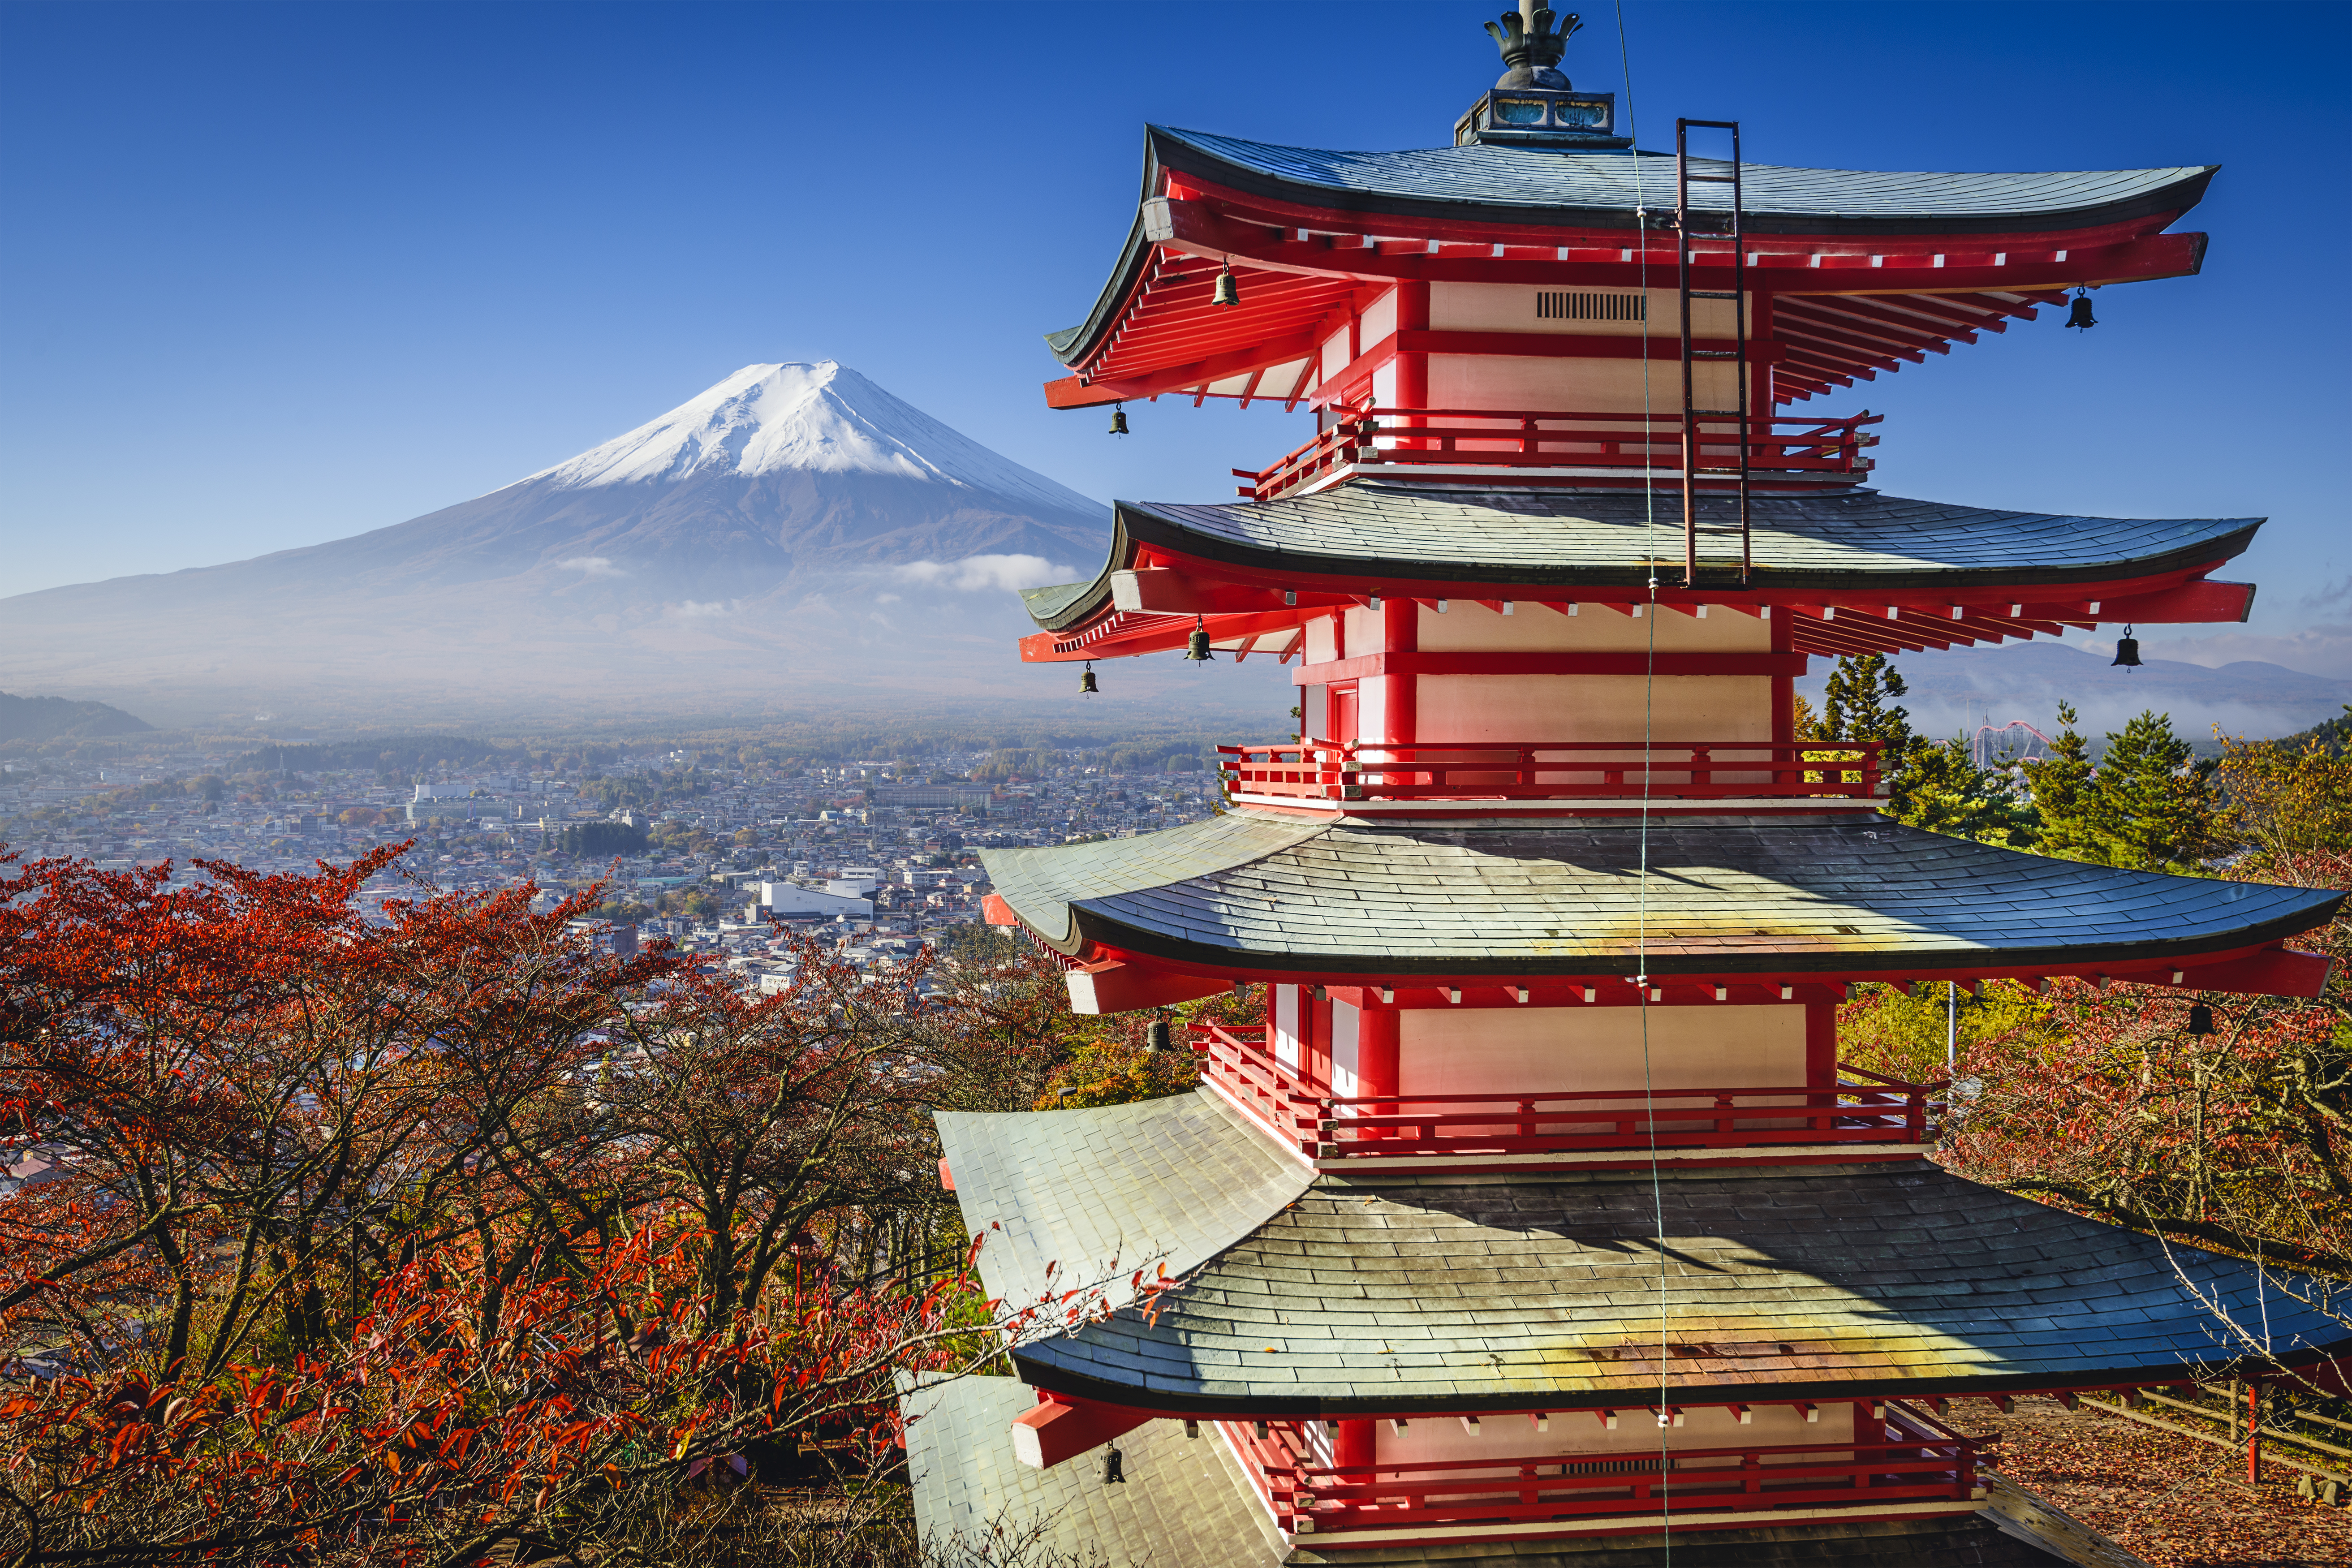 Mt Fuji and pagoda during the fall season in Japan. Image courtesy of Sean Pavone/Shutterstock.com.